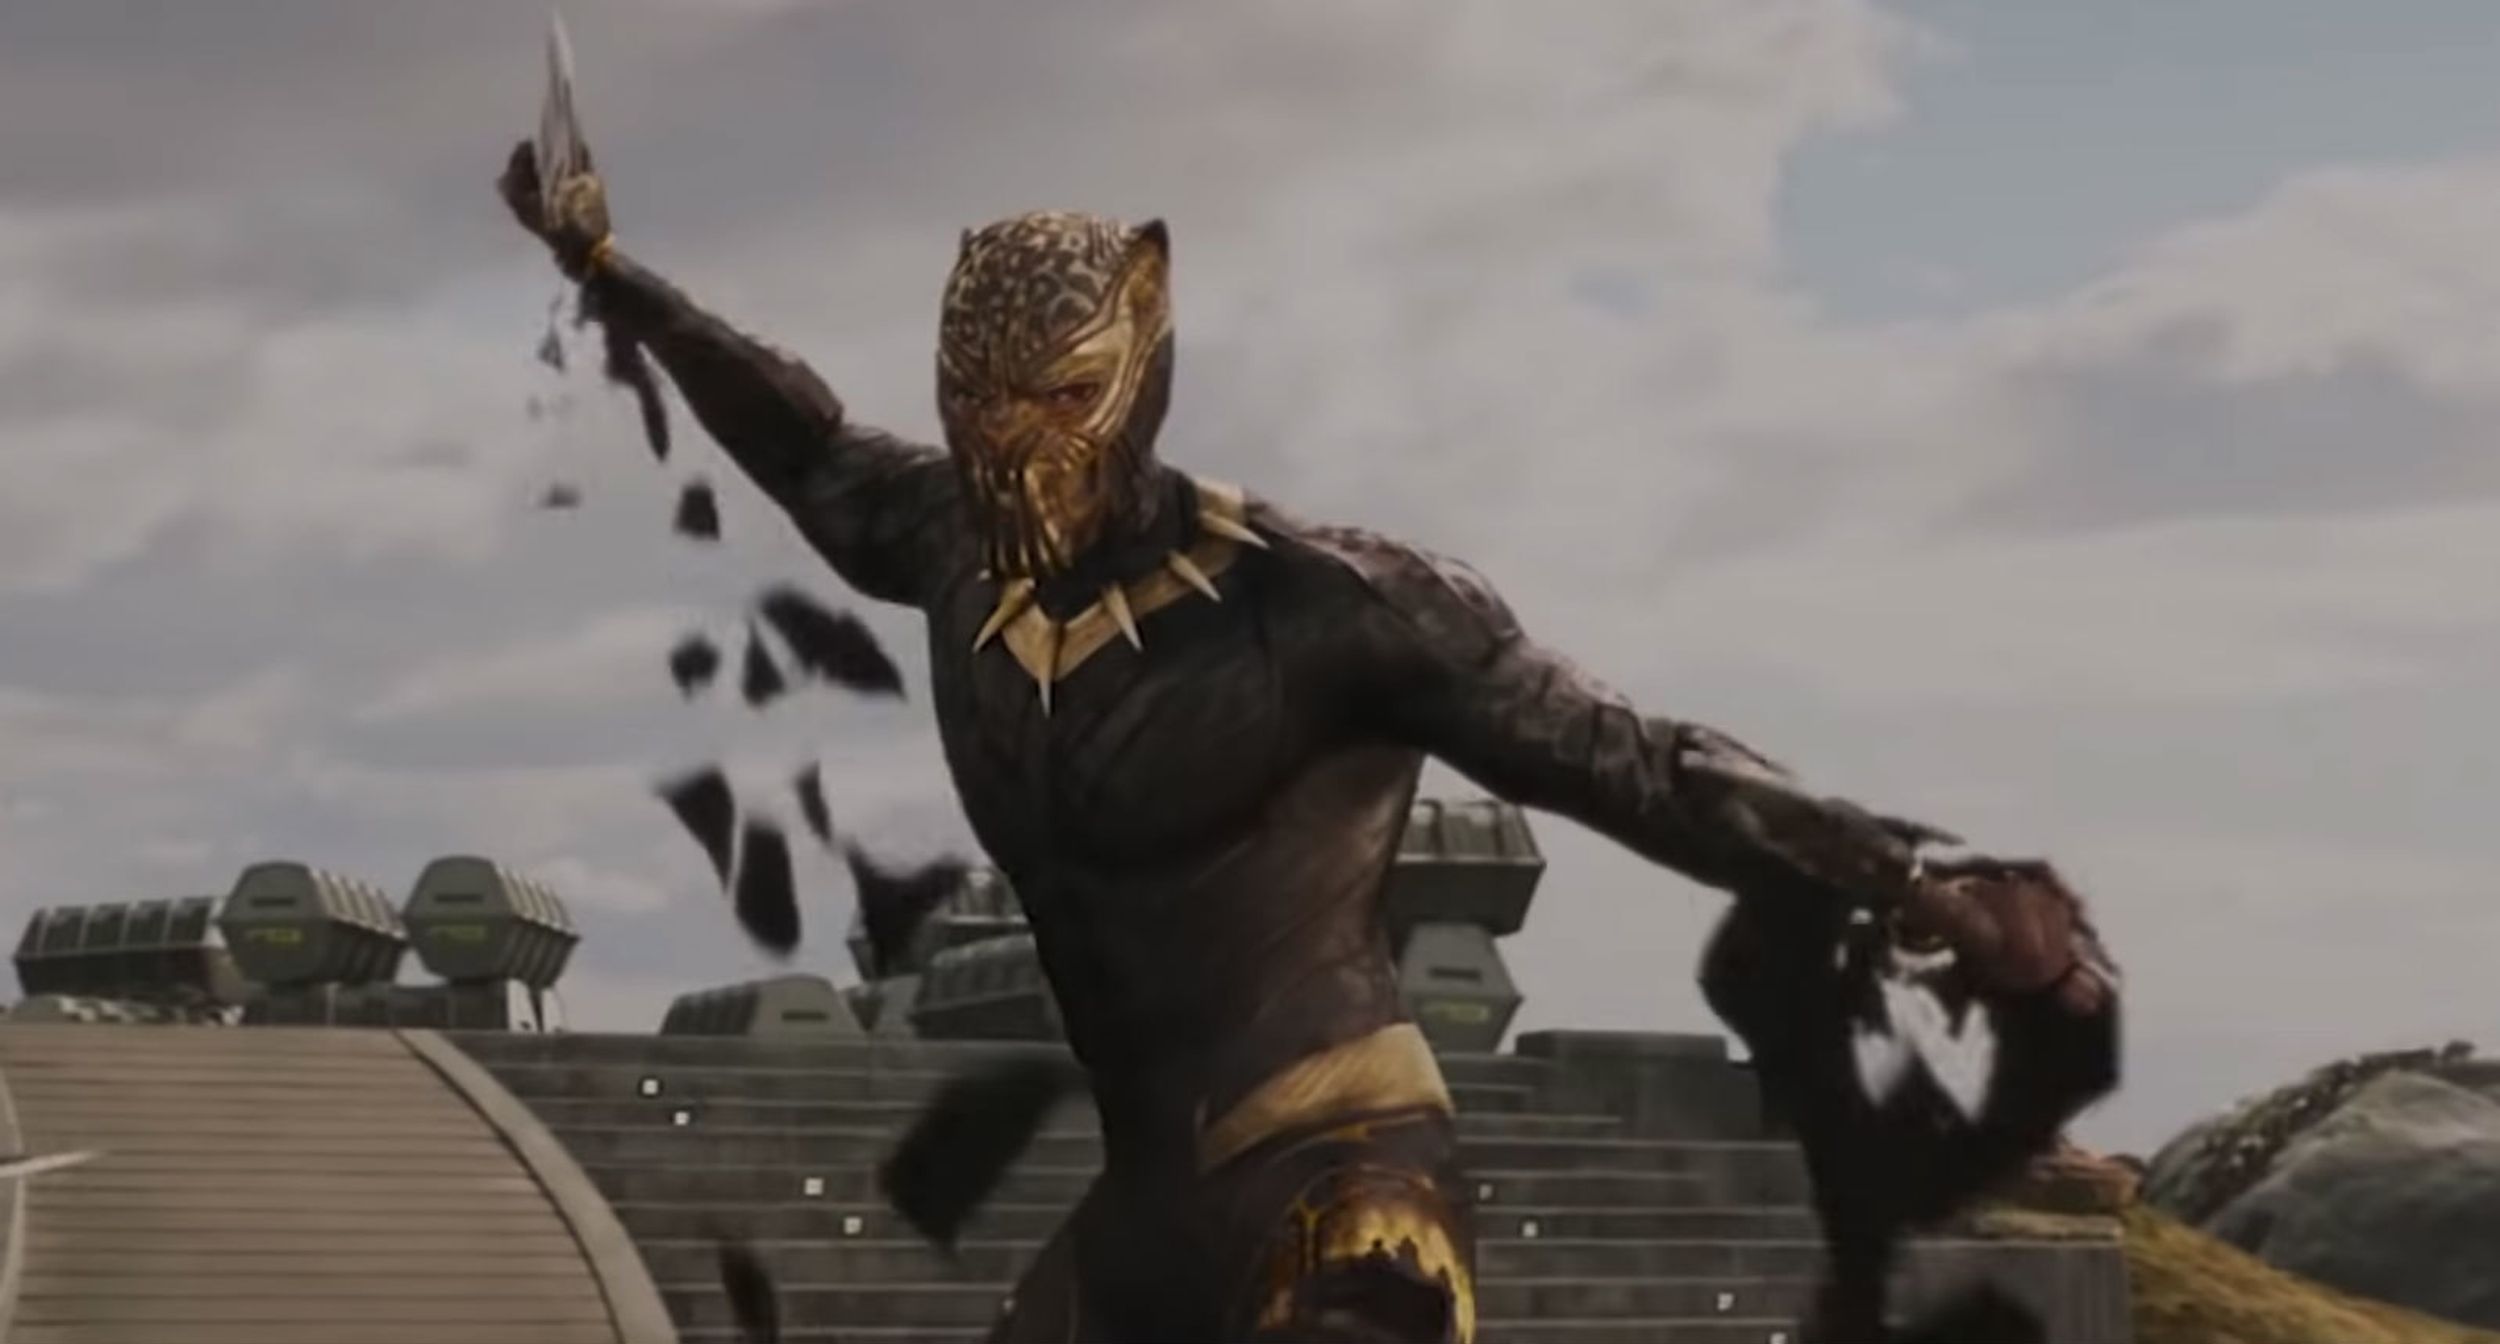 Video of Students Learning They're Going to 'Black Panther' Takes Internet by Storm